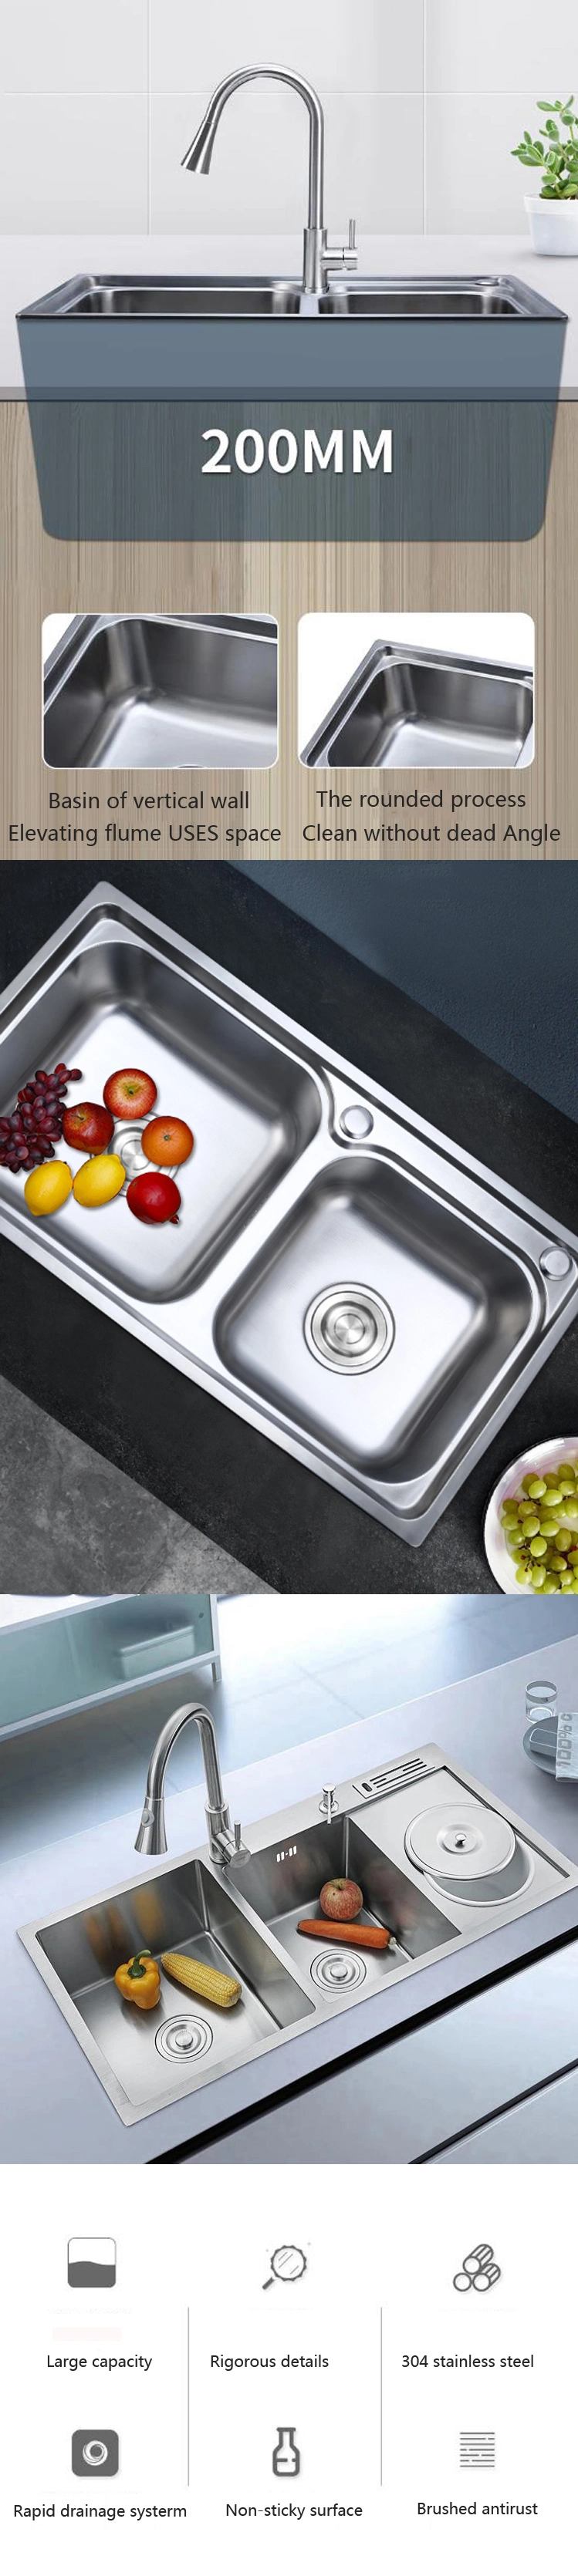 Custom Designed 304 Stainless Steel Kitchen Sinks Cabinets Faucets Kitchen Accessories, Bathroom Accessories